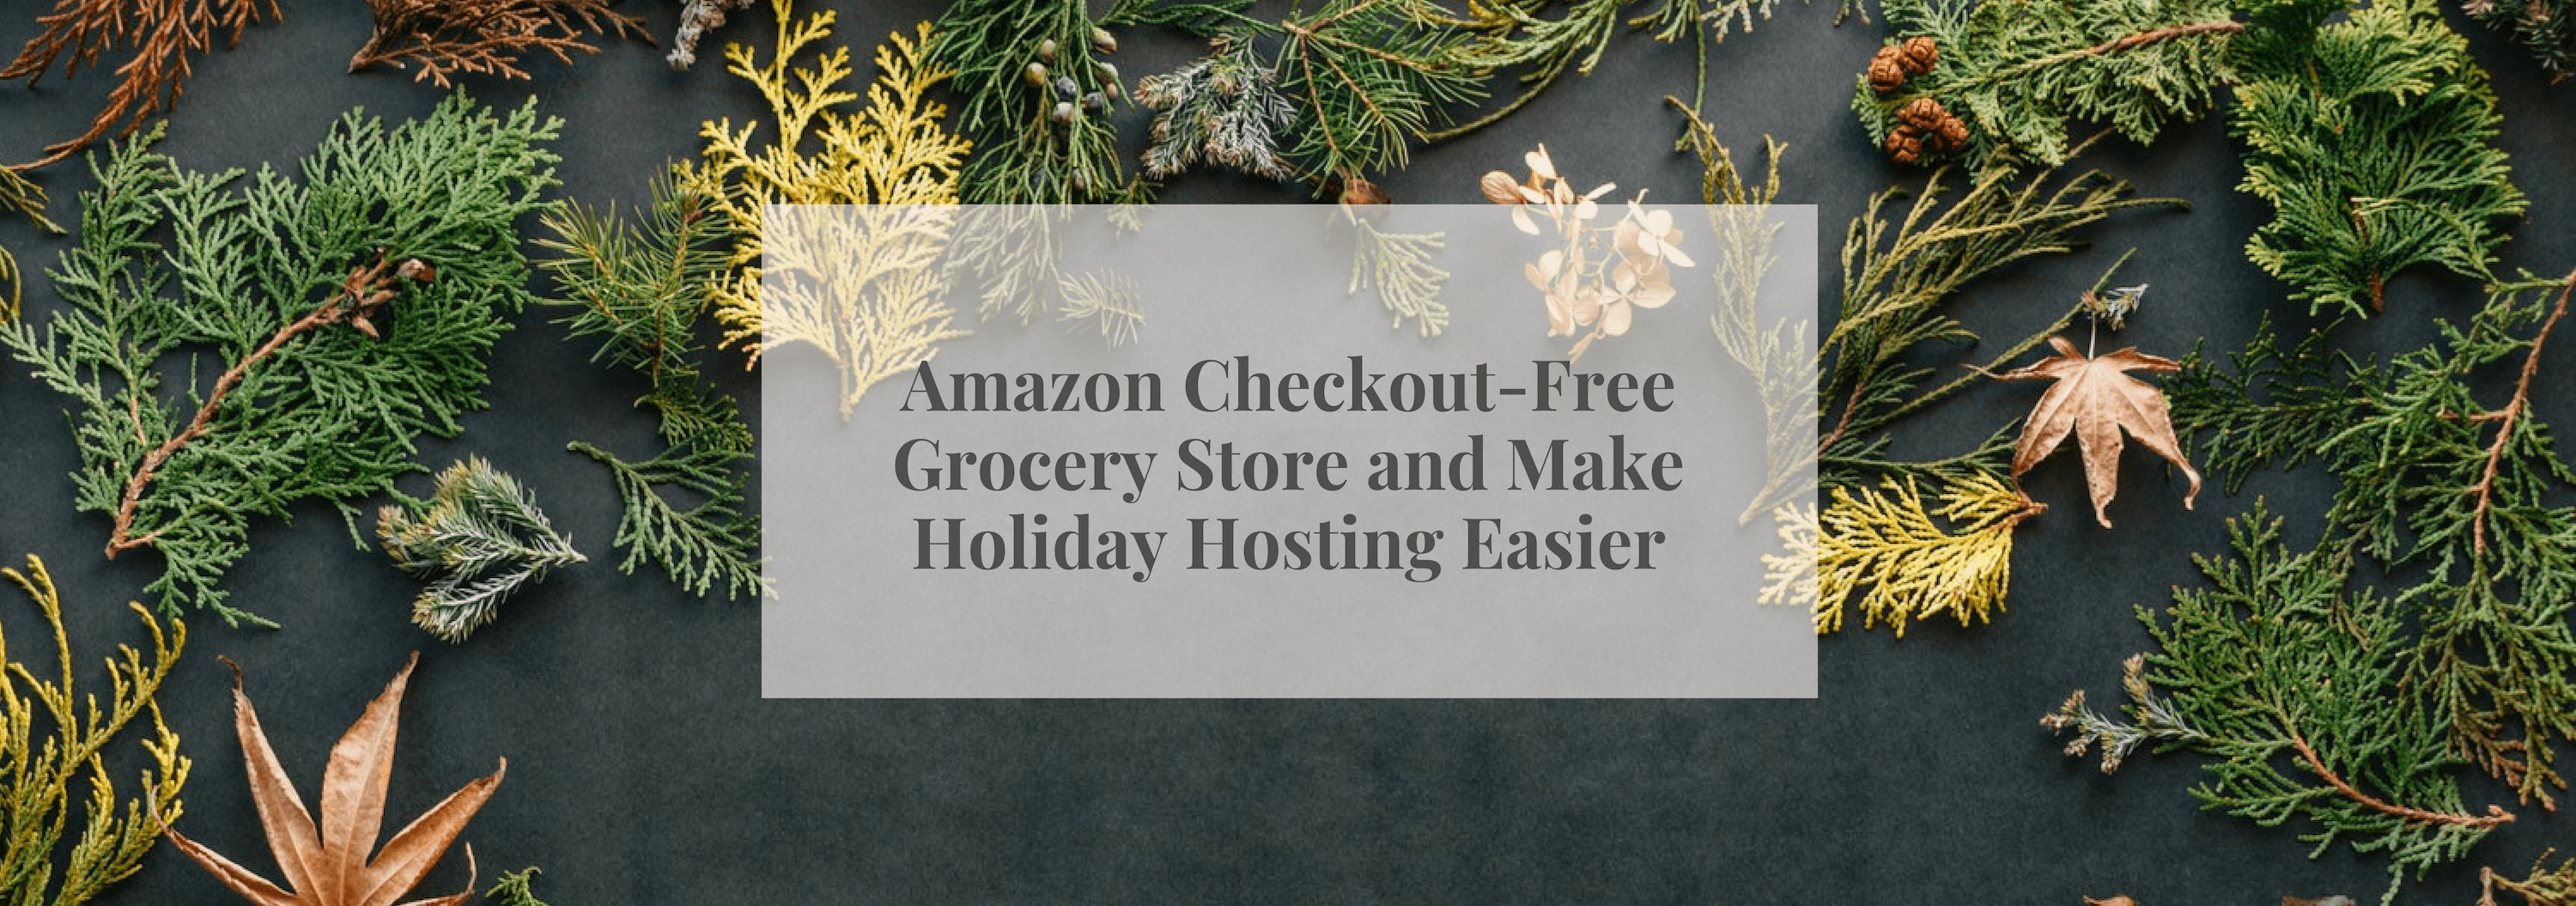 Amazon Checkout-Free Grocery Store and Make Holiday Hosting Easier - Numi